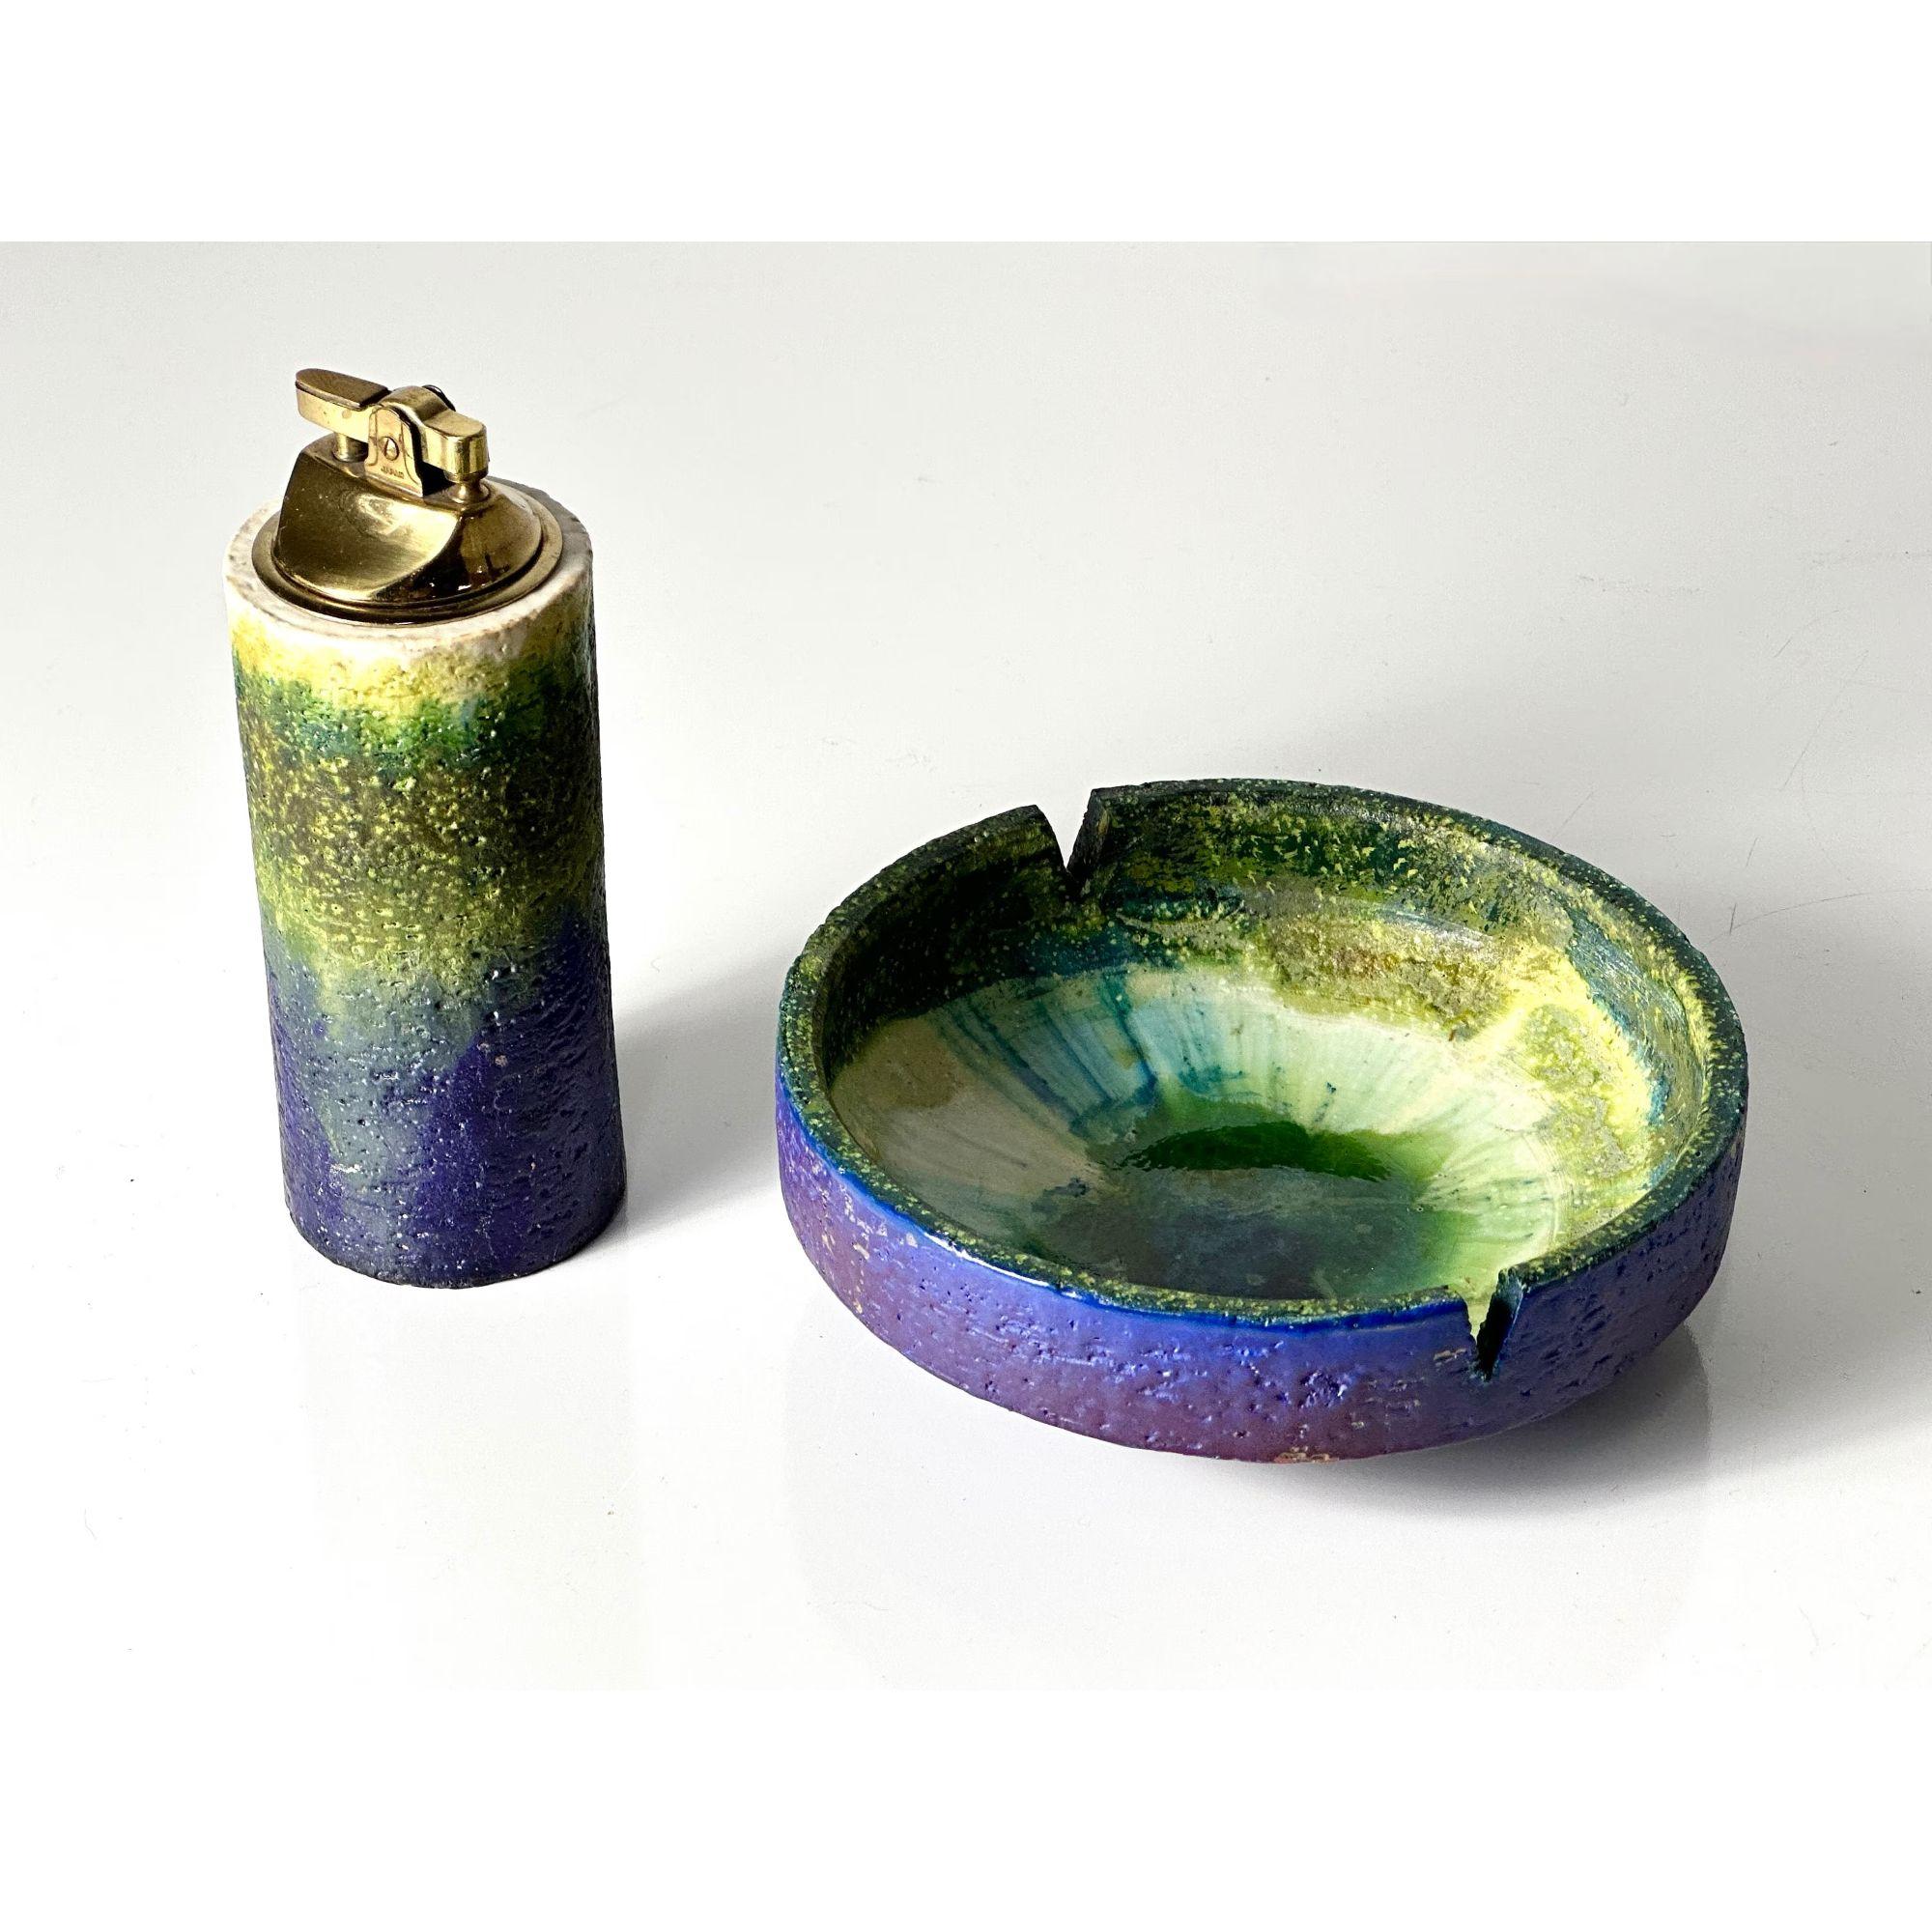 Vintage Marcello Fantoni for Raymor Ceramic Lighter and Ashtray Set Italian Pottery Mid Century Modern

Matching ashtray and table lighter set by Marcello Fantoni for Raymor circa 1950s
Glazed ceramic in phenomenal purple and green glaze
Both signed